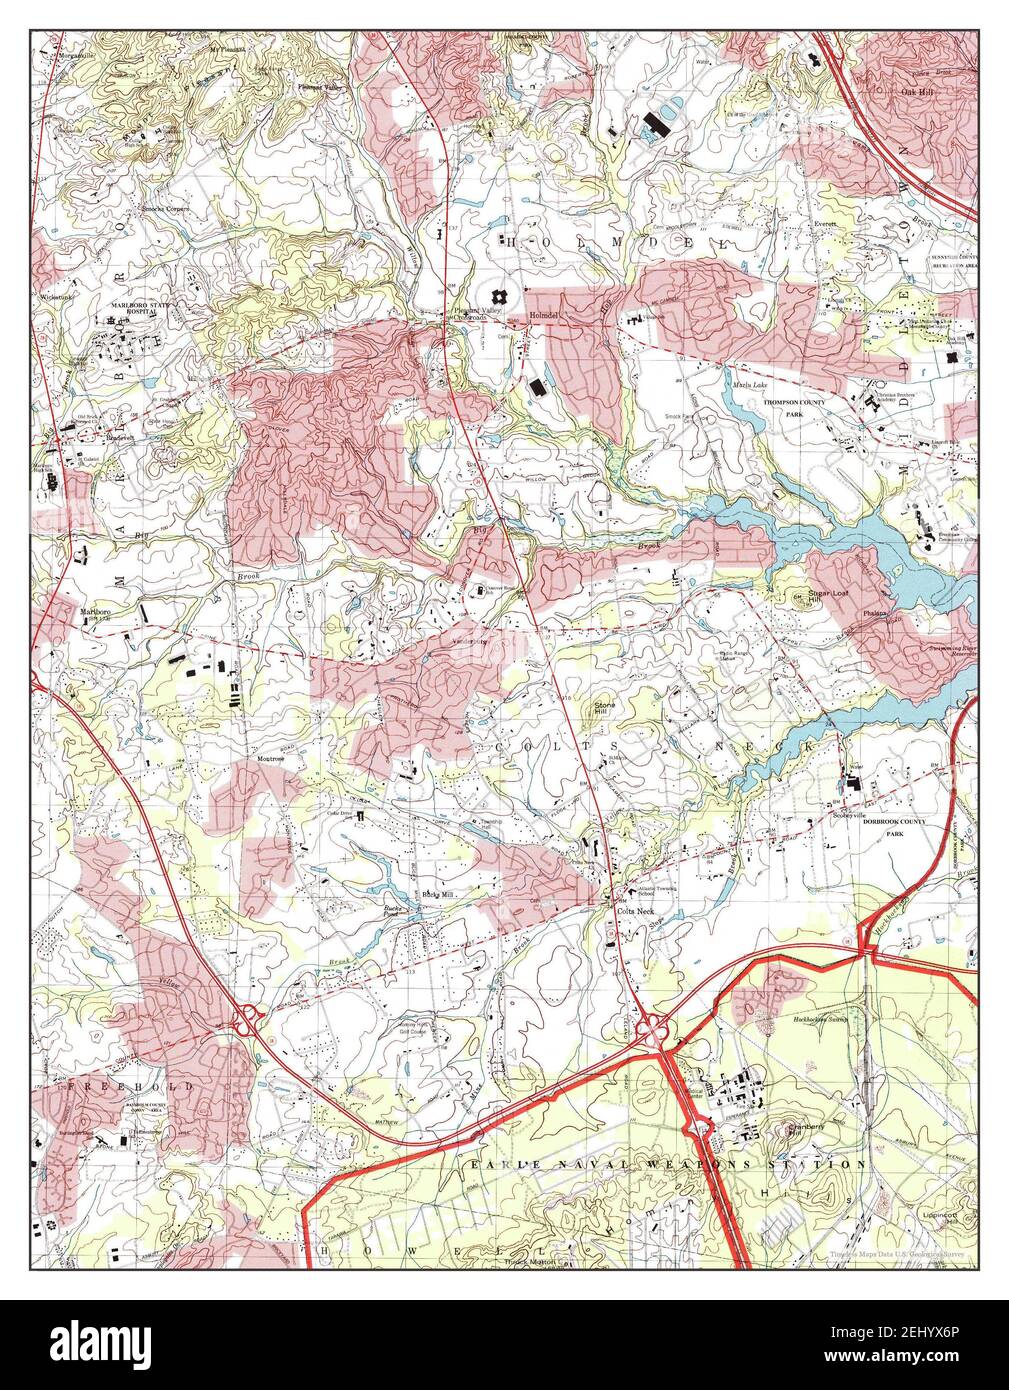 Marlboro, New Jersey, map 1995, 1:24000, United States of America by ...